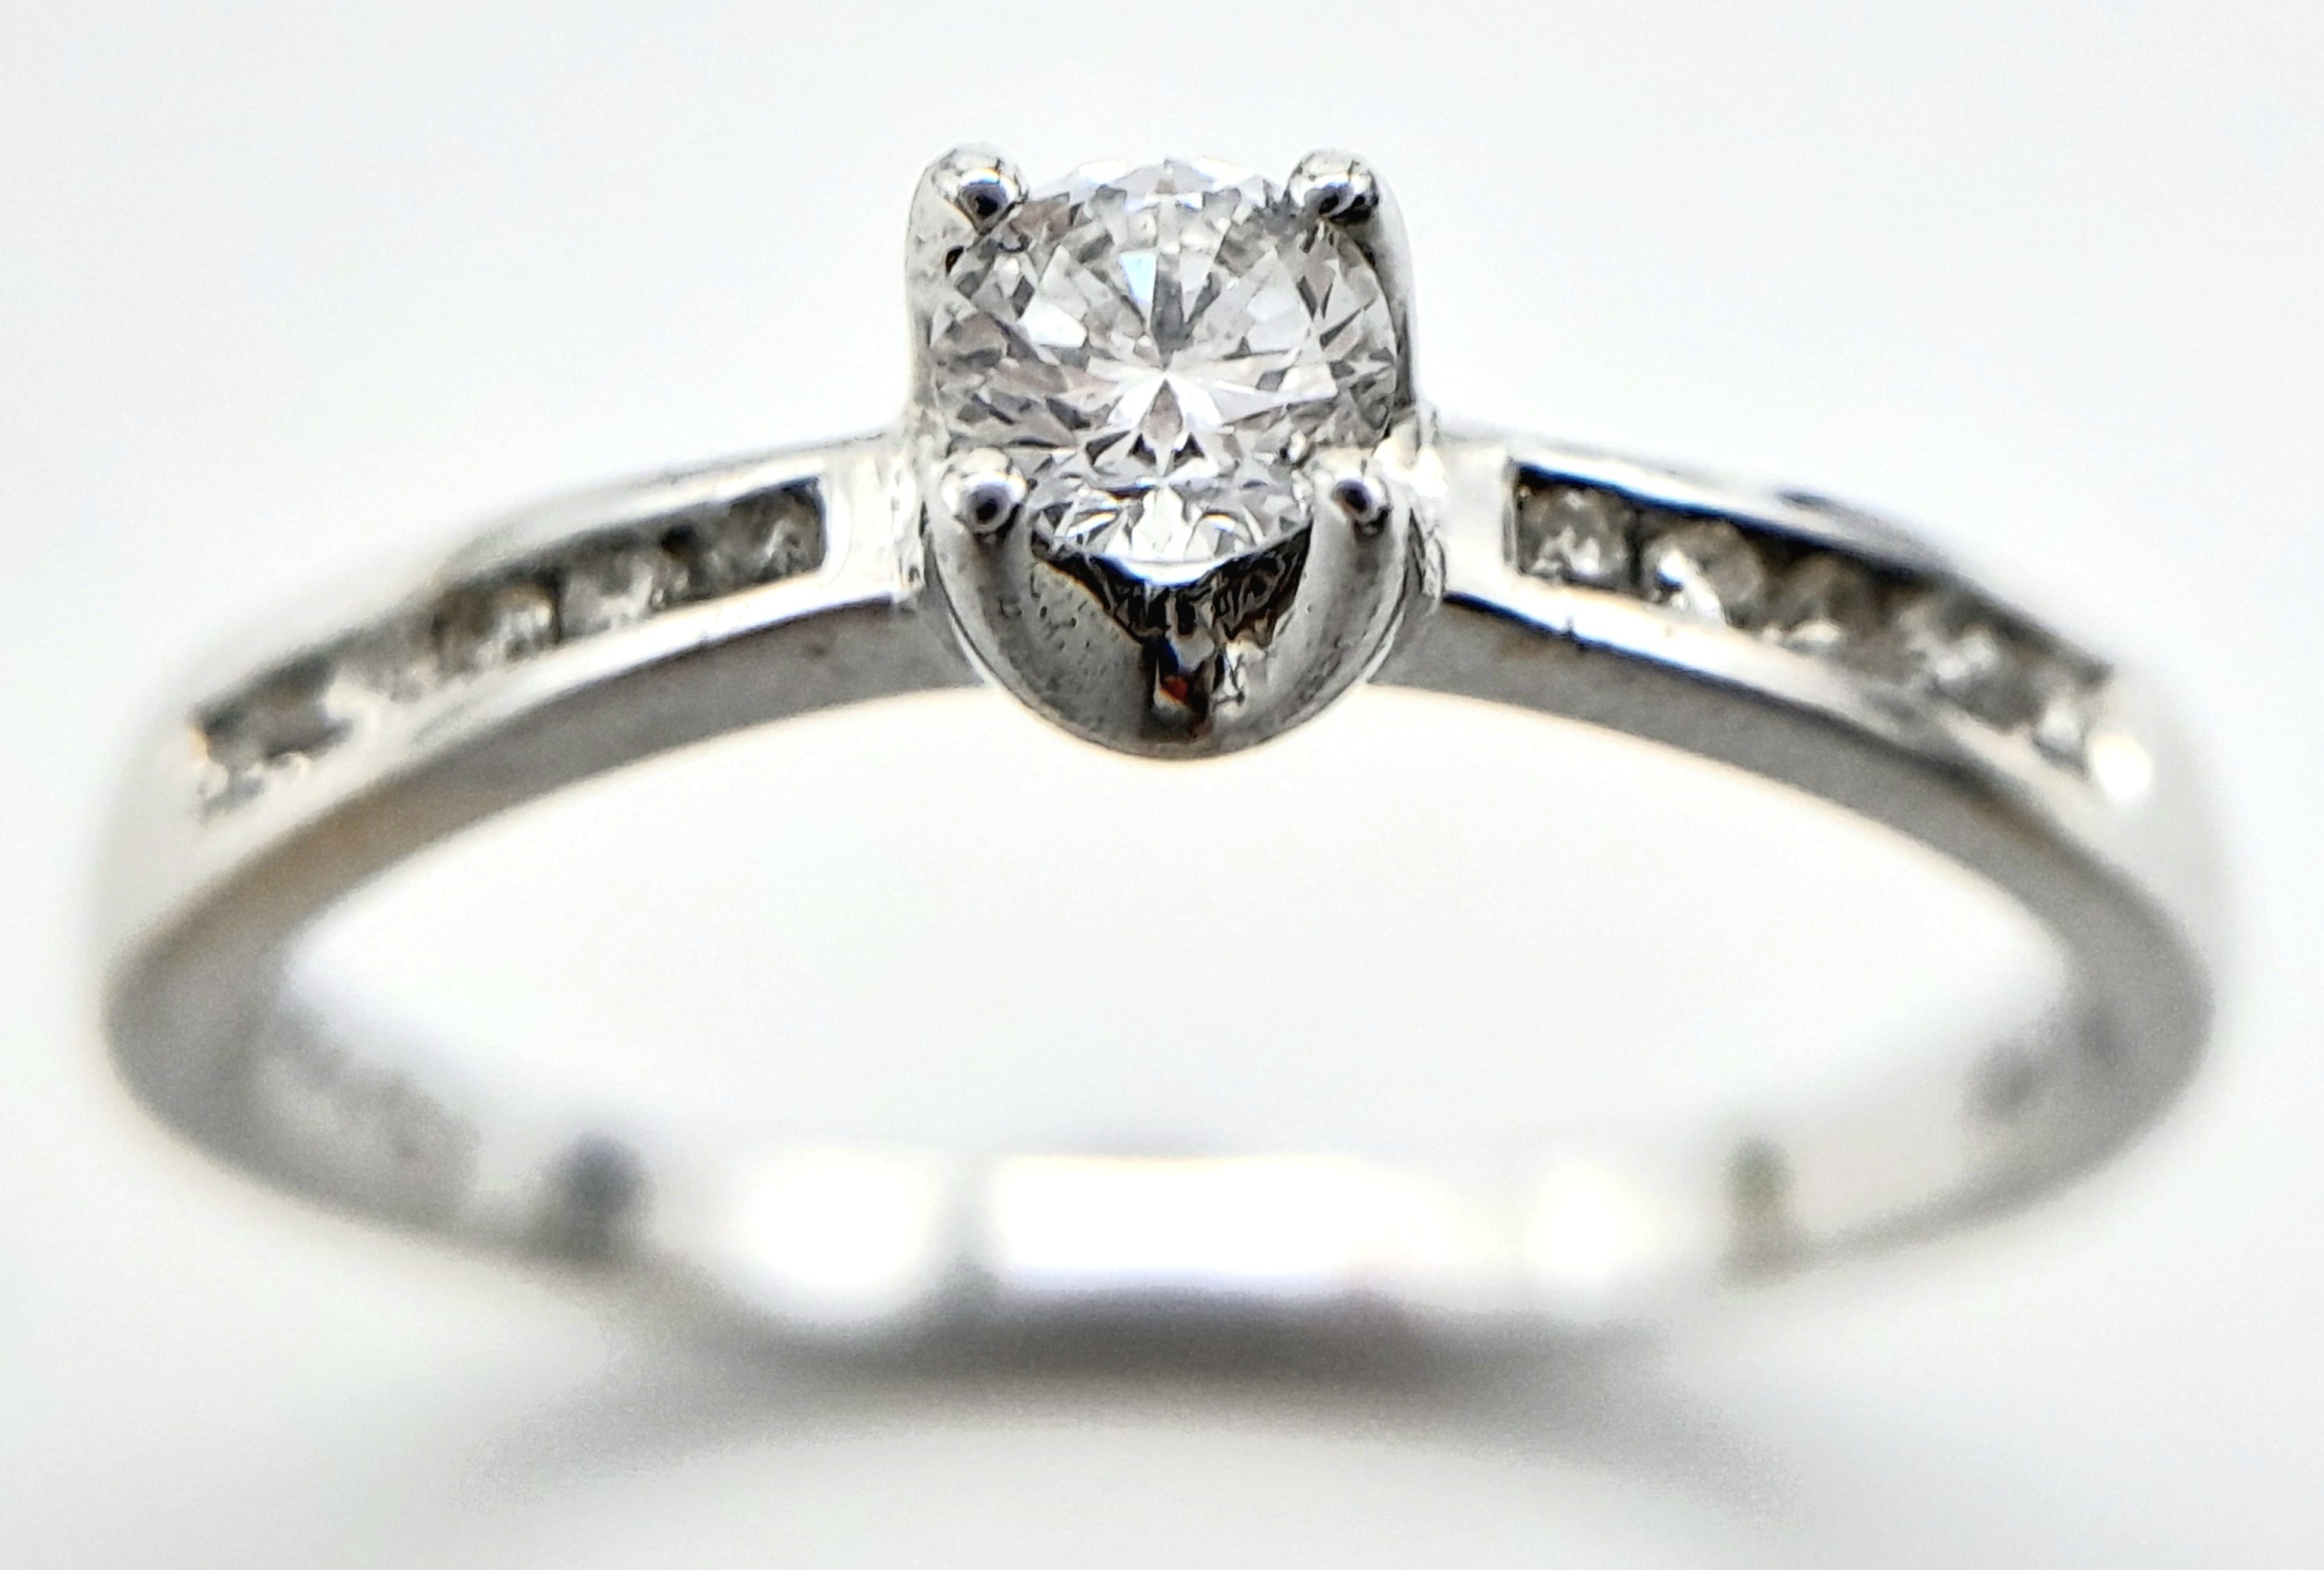 AN 18K WHITE GOLD DIAMOND SOLITAIRE RING - WITH DIAMOND SHOULDERS. 0.25CT. 1.9G. SIZE L - Image 3 of 6